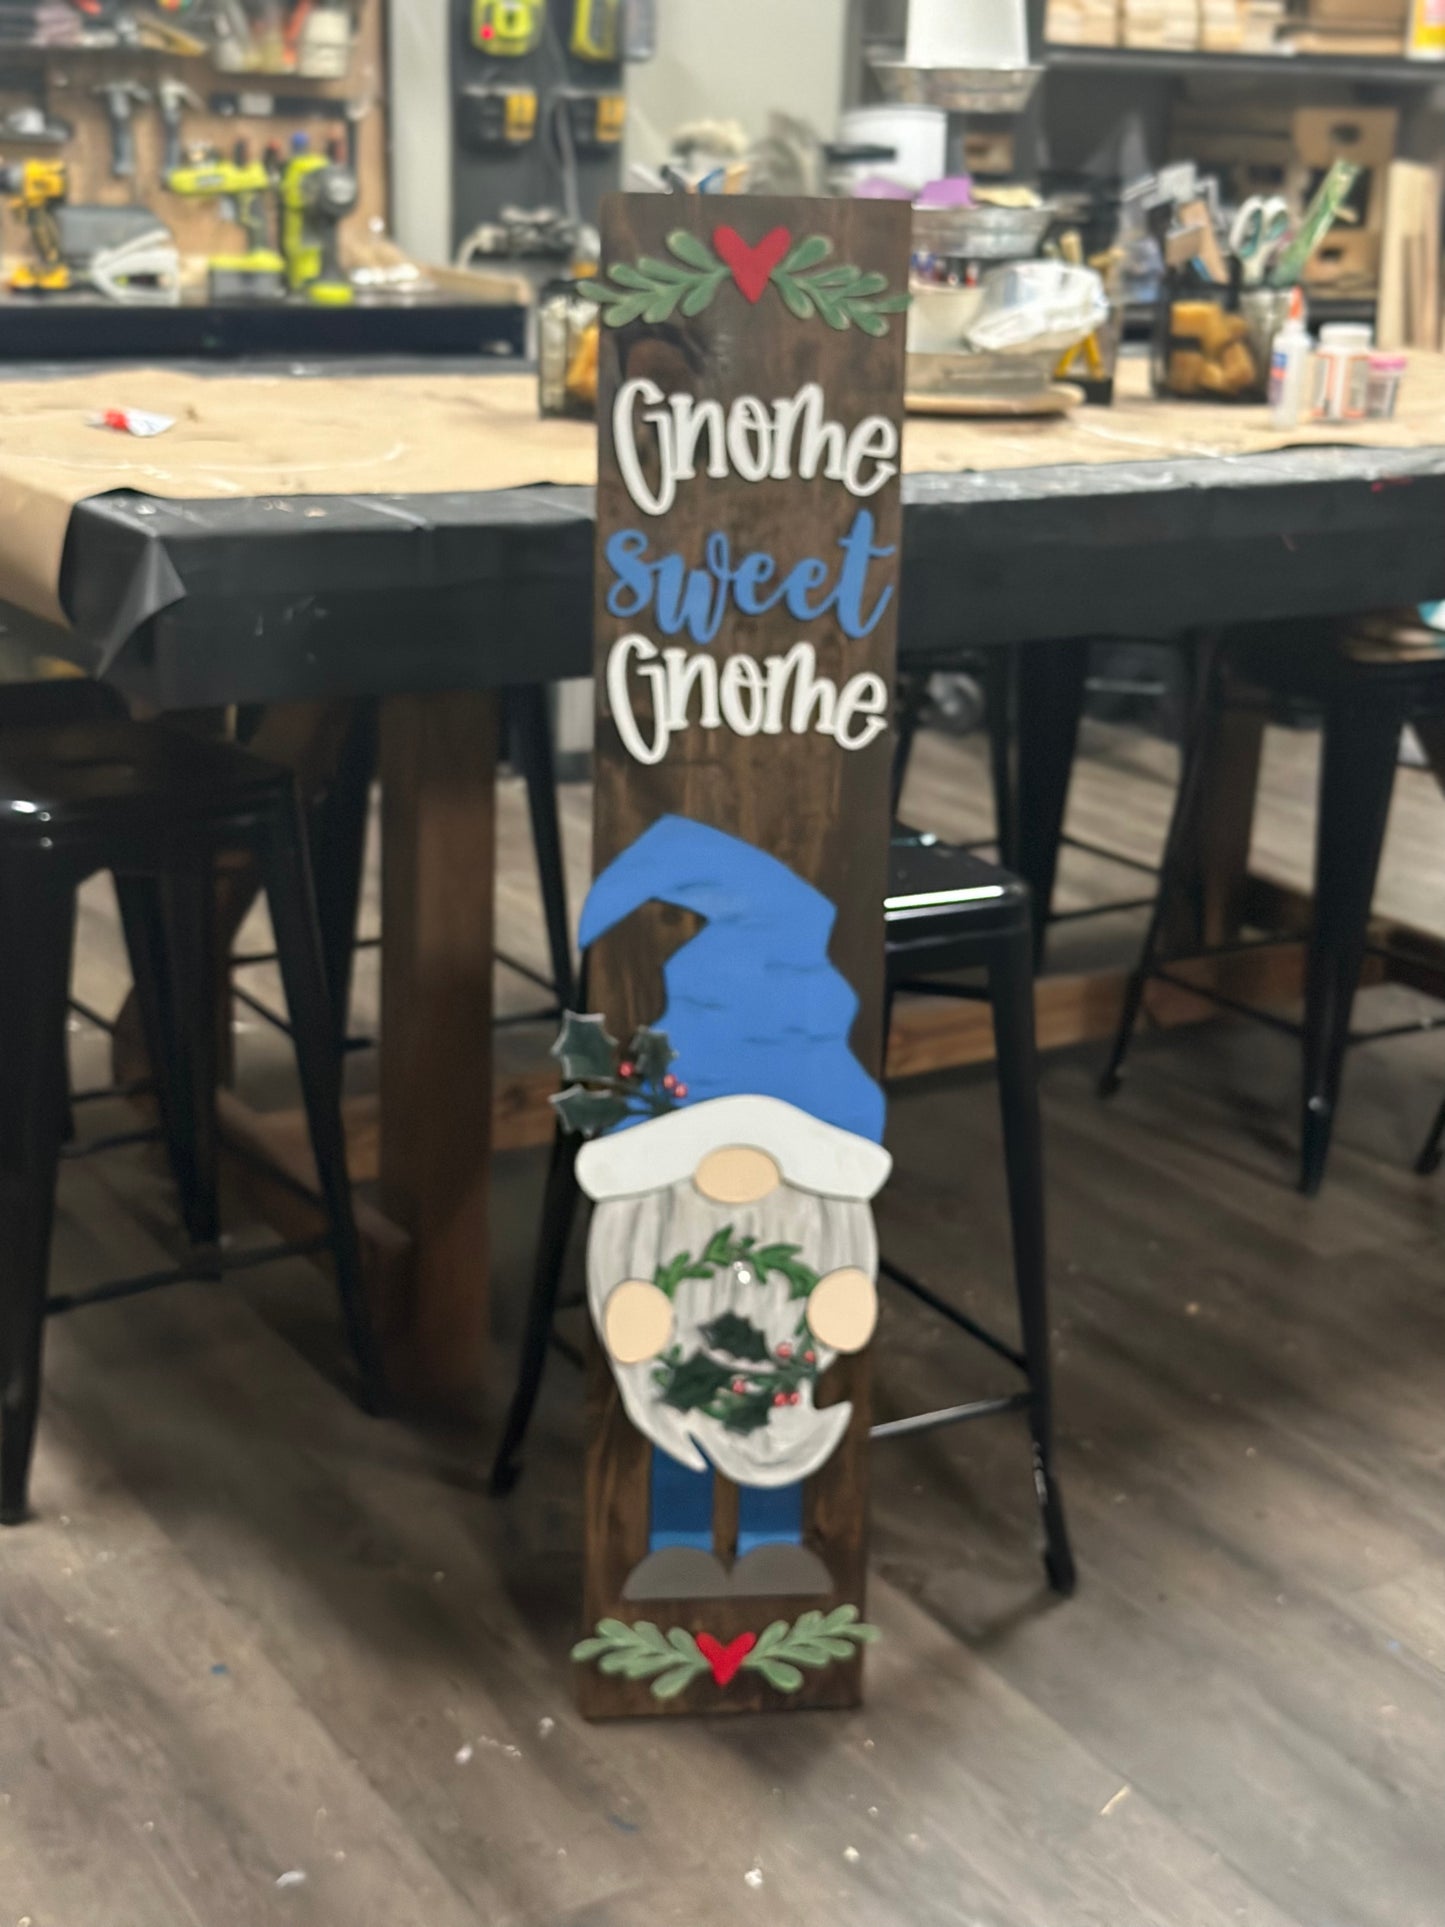 Interchangeable Gnome Porch Sign  Add-Ons